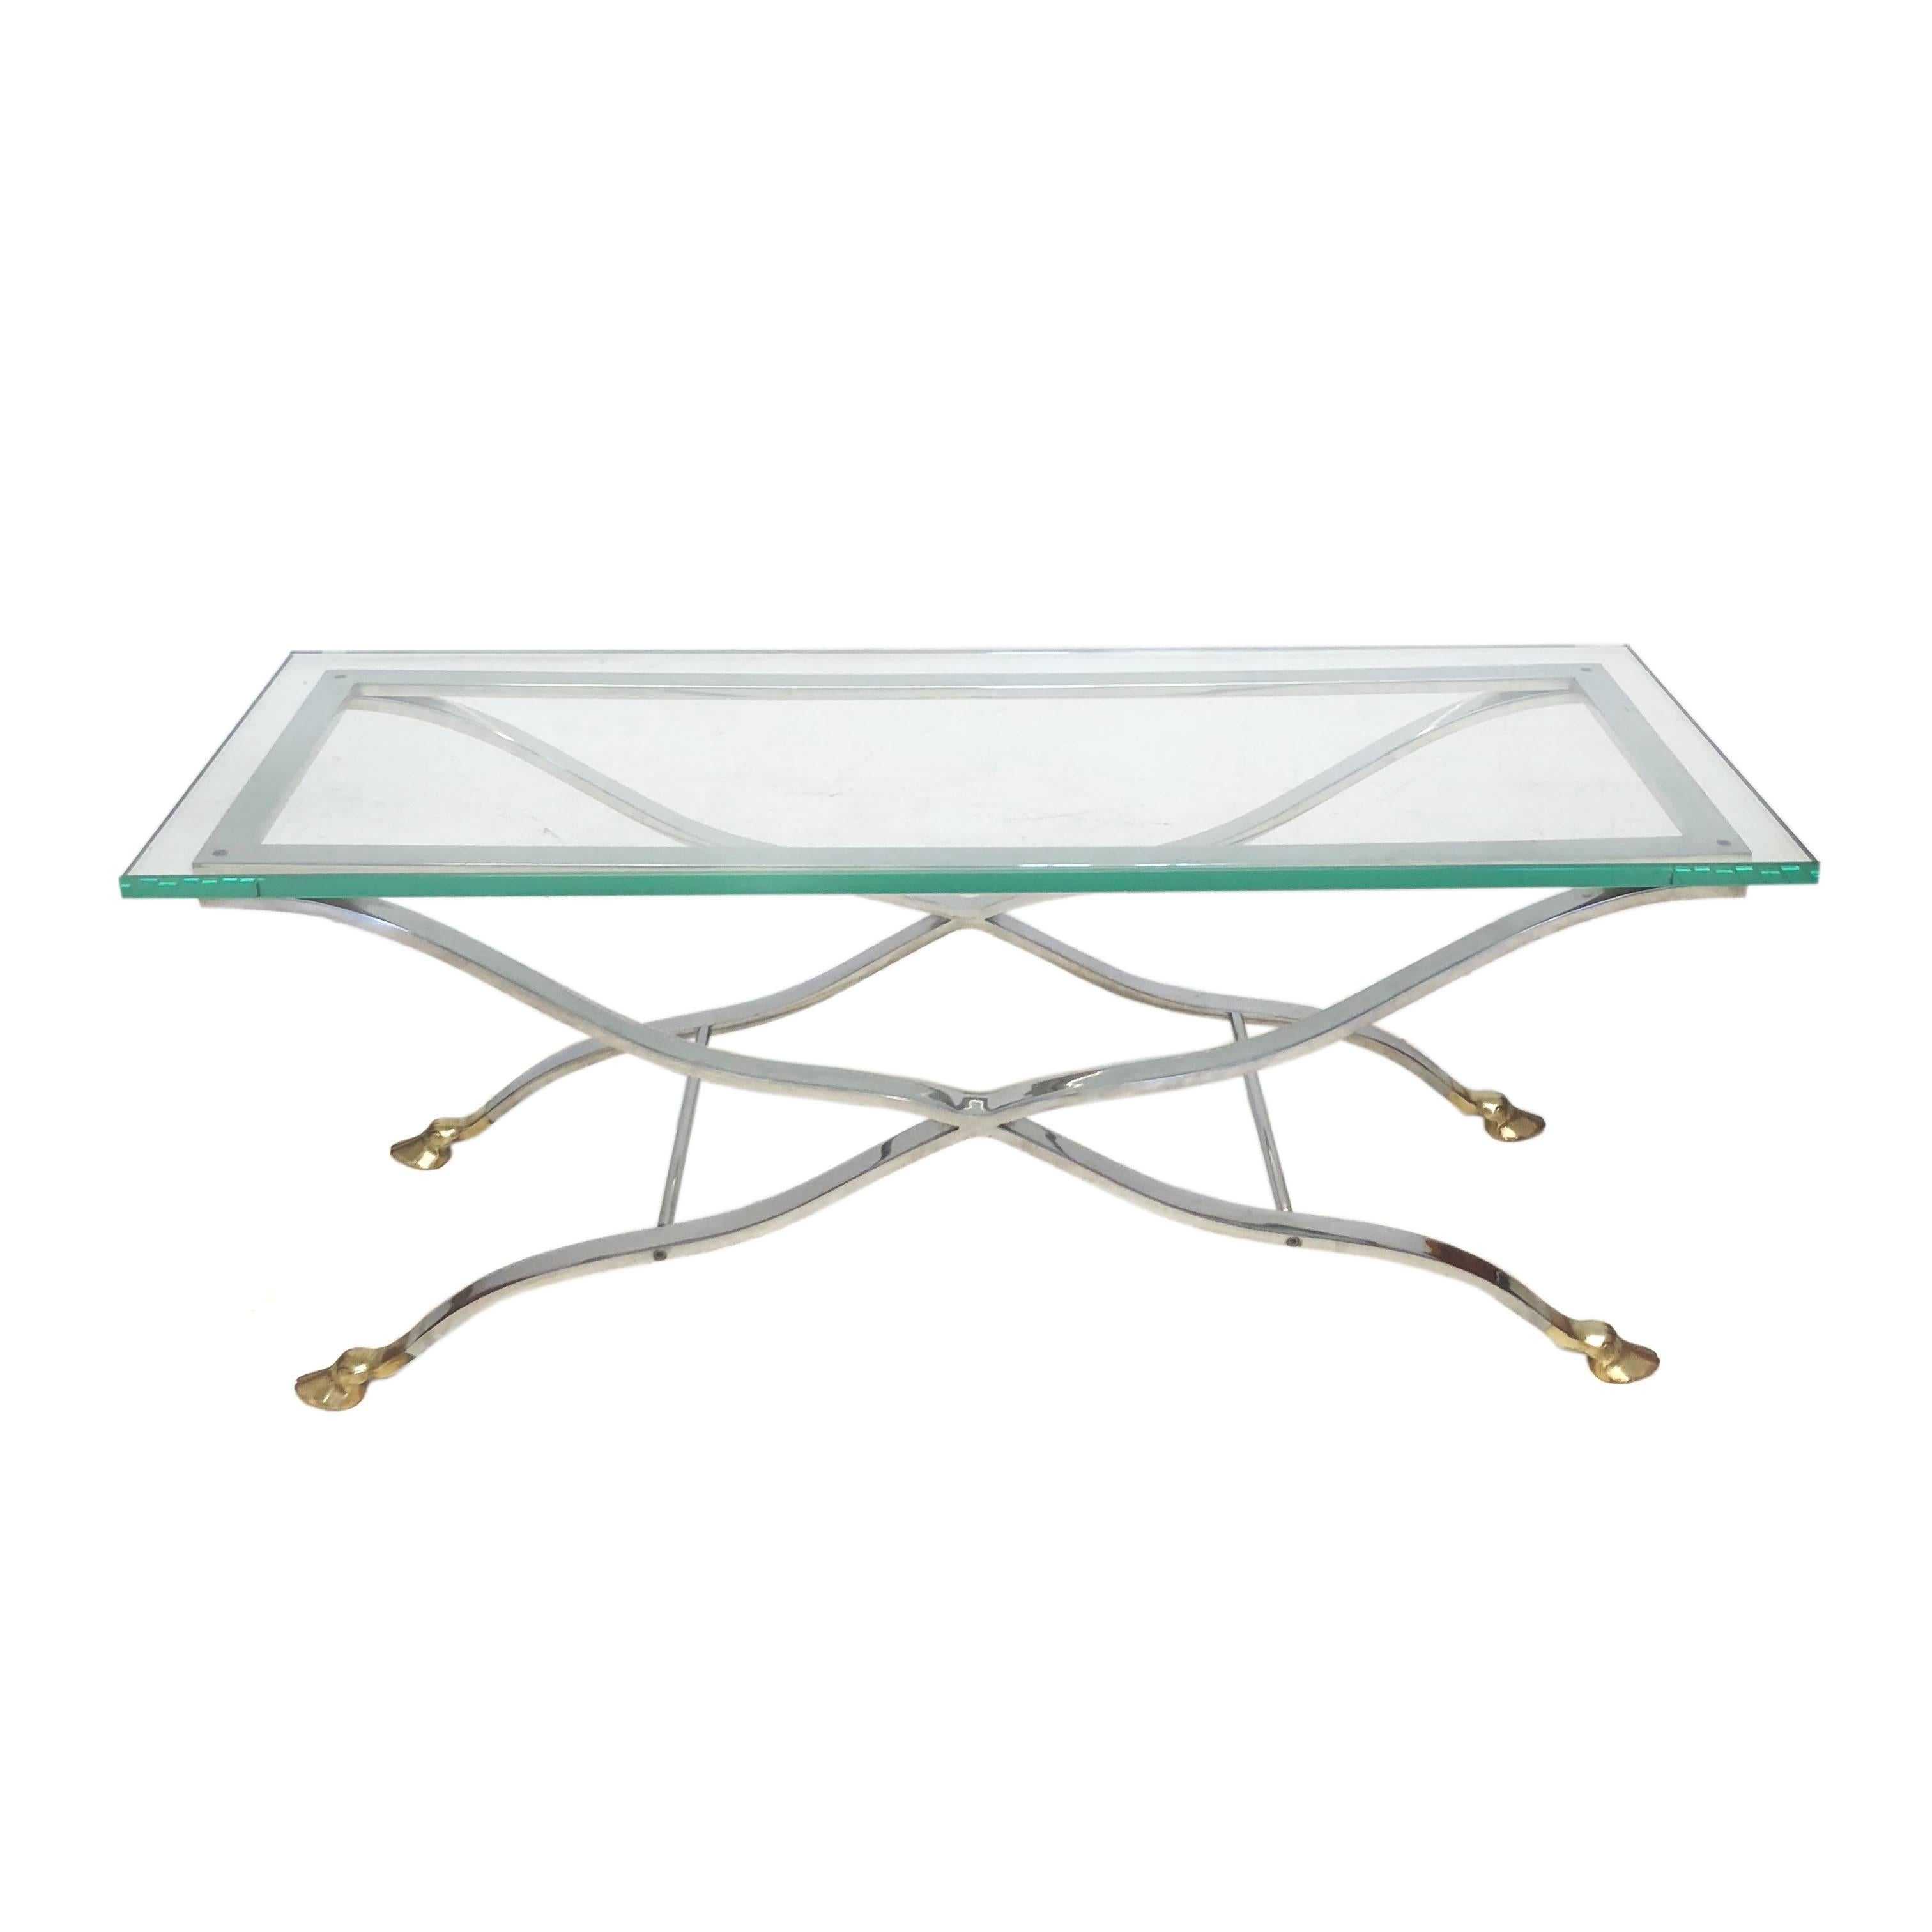 Mid-Century Modern highly polished chrome and glass coffee table or console with brass hoof feet. Age appropriate wear.

Measurements:
Overall: 46